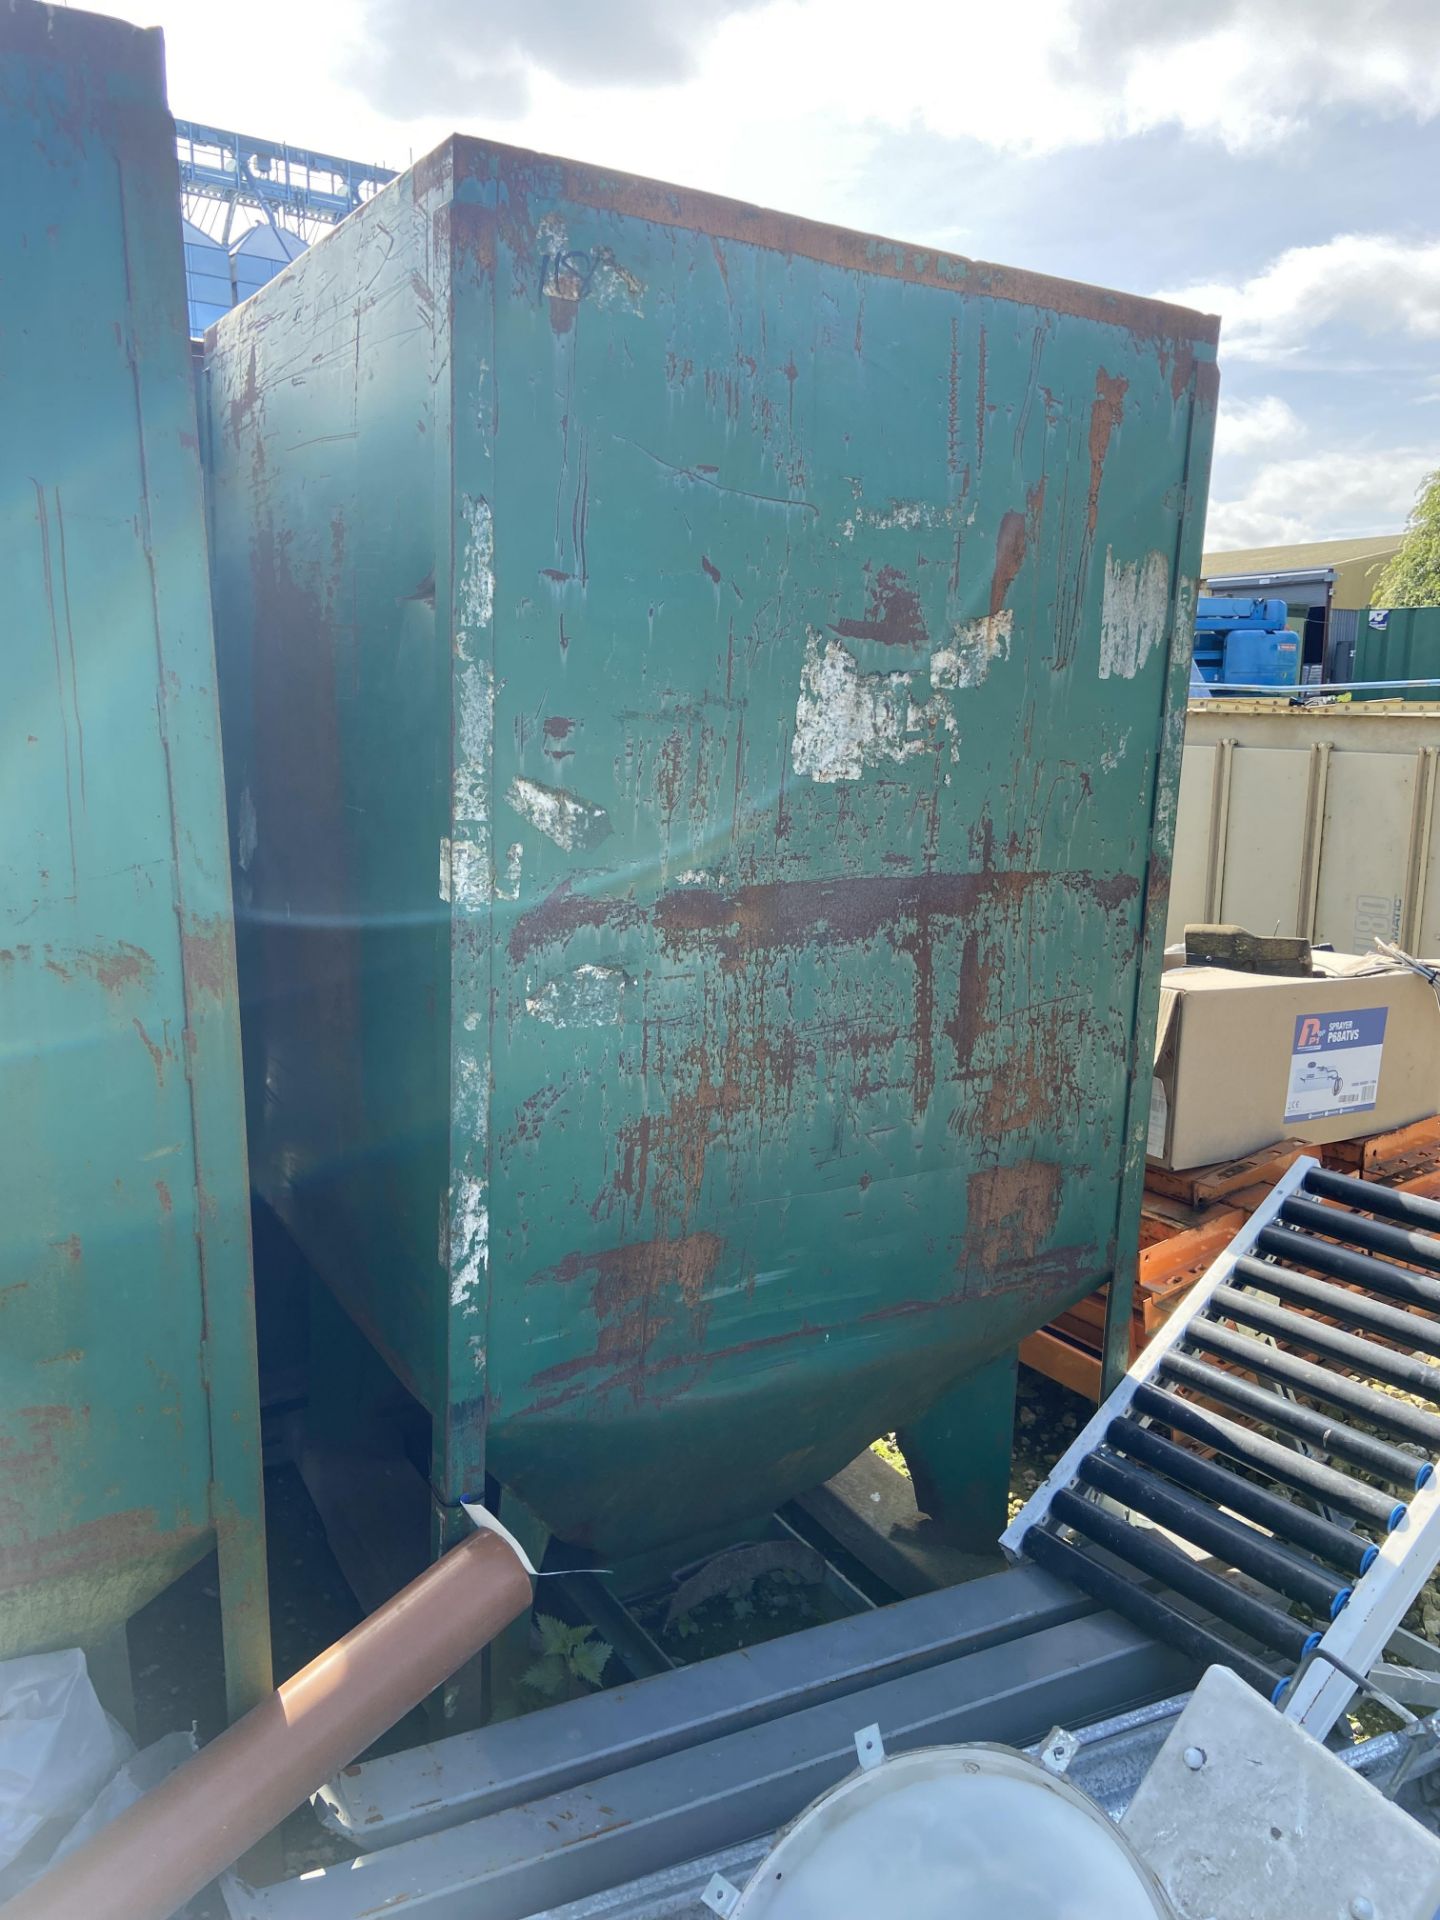 Ten Hopper Bottomed Steel Tote Bins, mainly approx. 1.2m x 1.2m x 2m deep; lot located Driby Top,